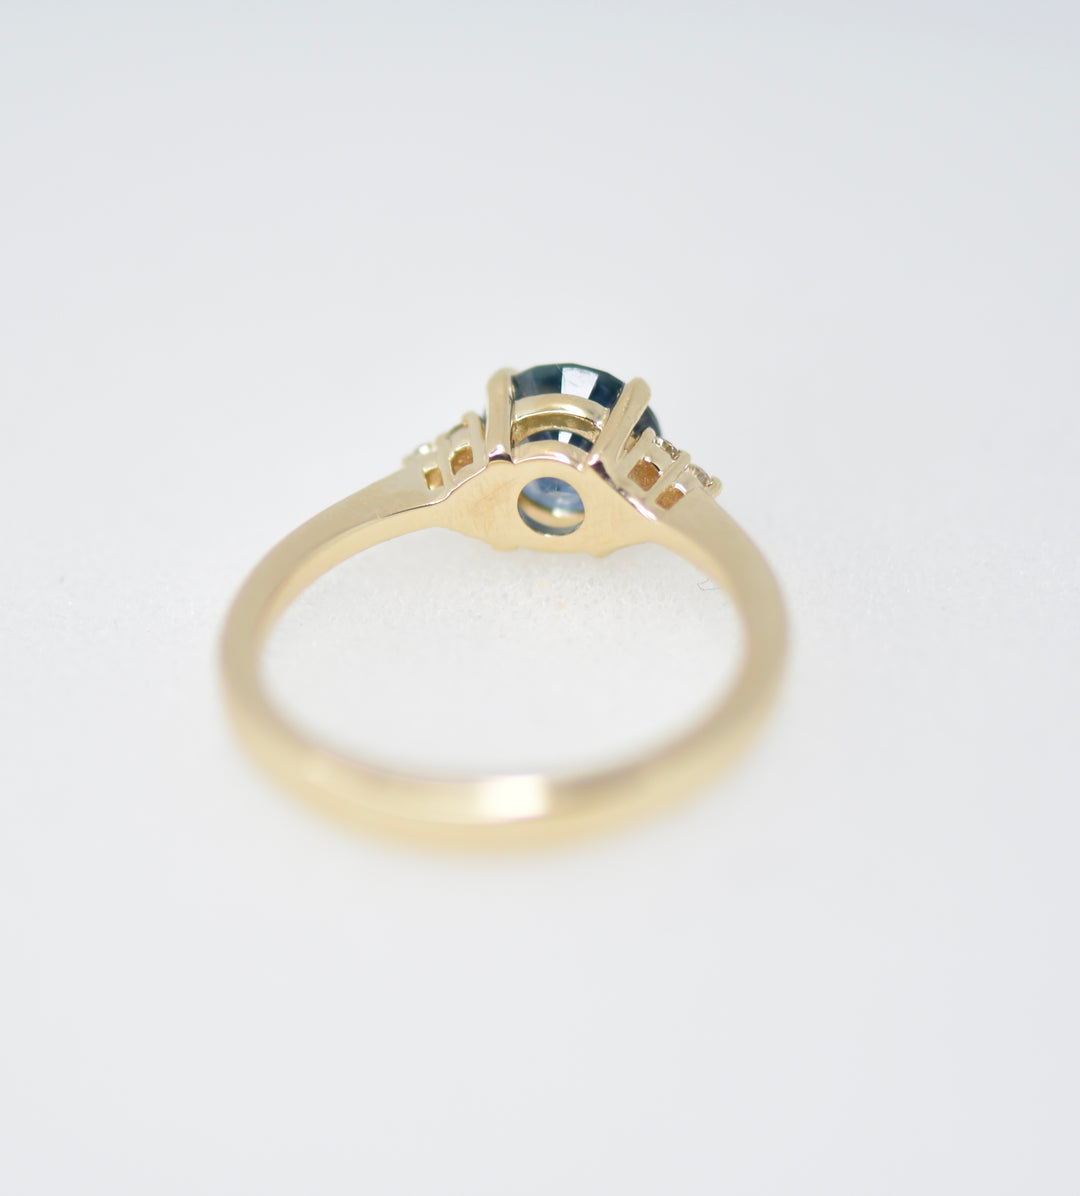 Teal Blue Green Montana Sapphire Solitaire Ring w/ Diamonds Accents 14K Gold, Teal Sapphire Engagement Ring